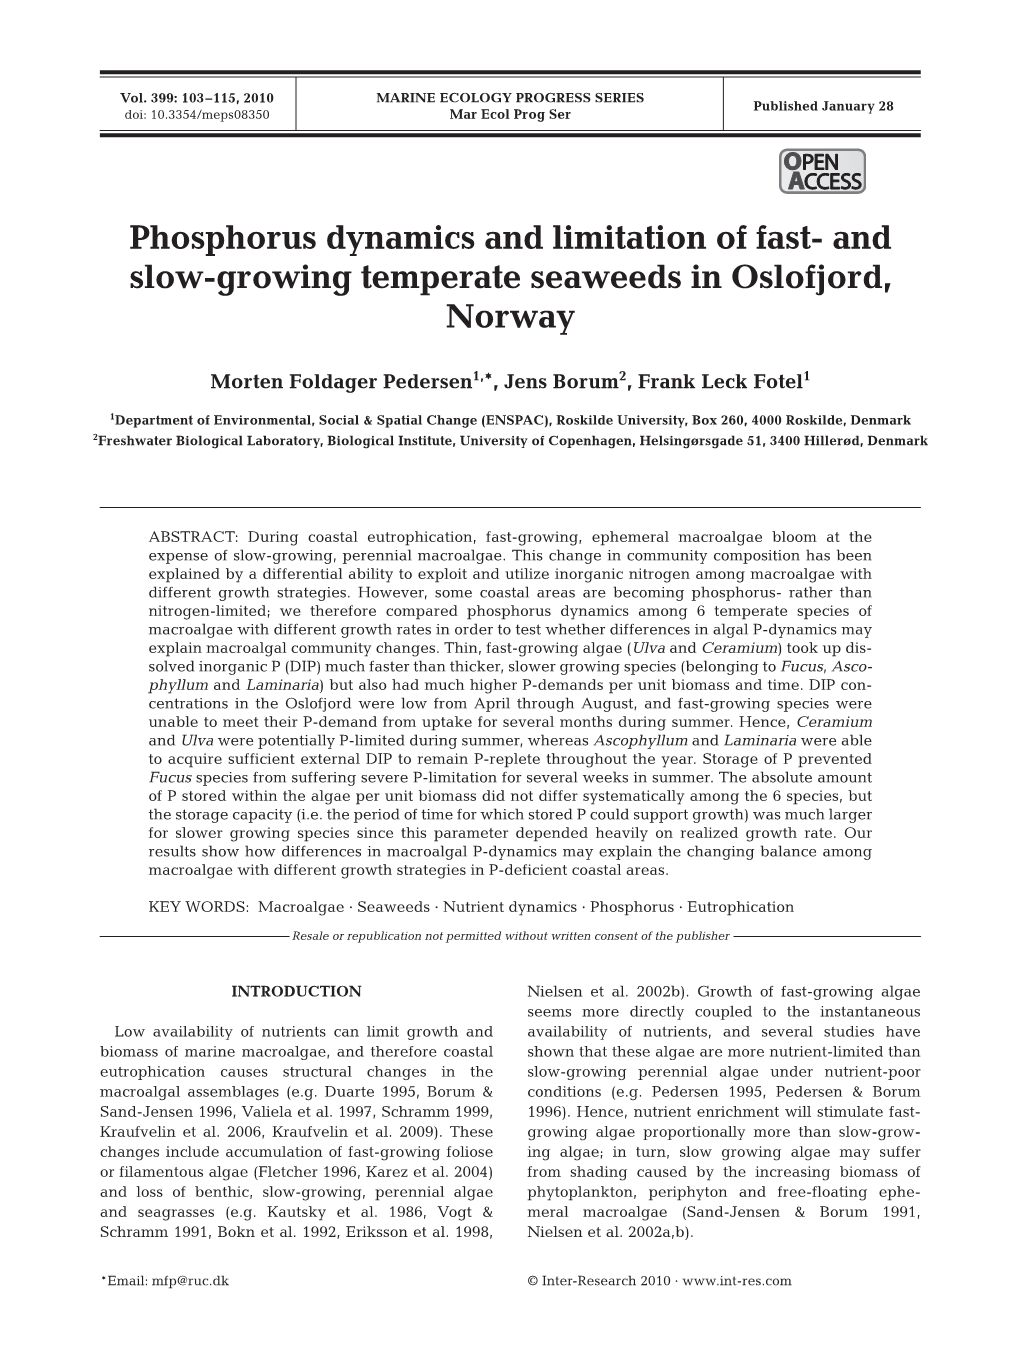 Phosphorus Dynamics and Limitation of Fast-And Slow-Growing Temperate